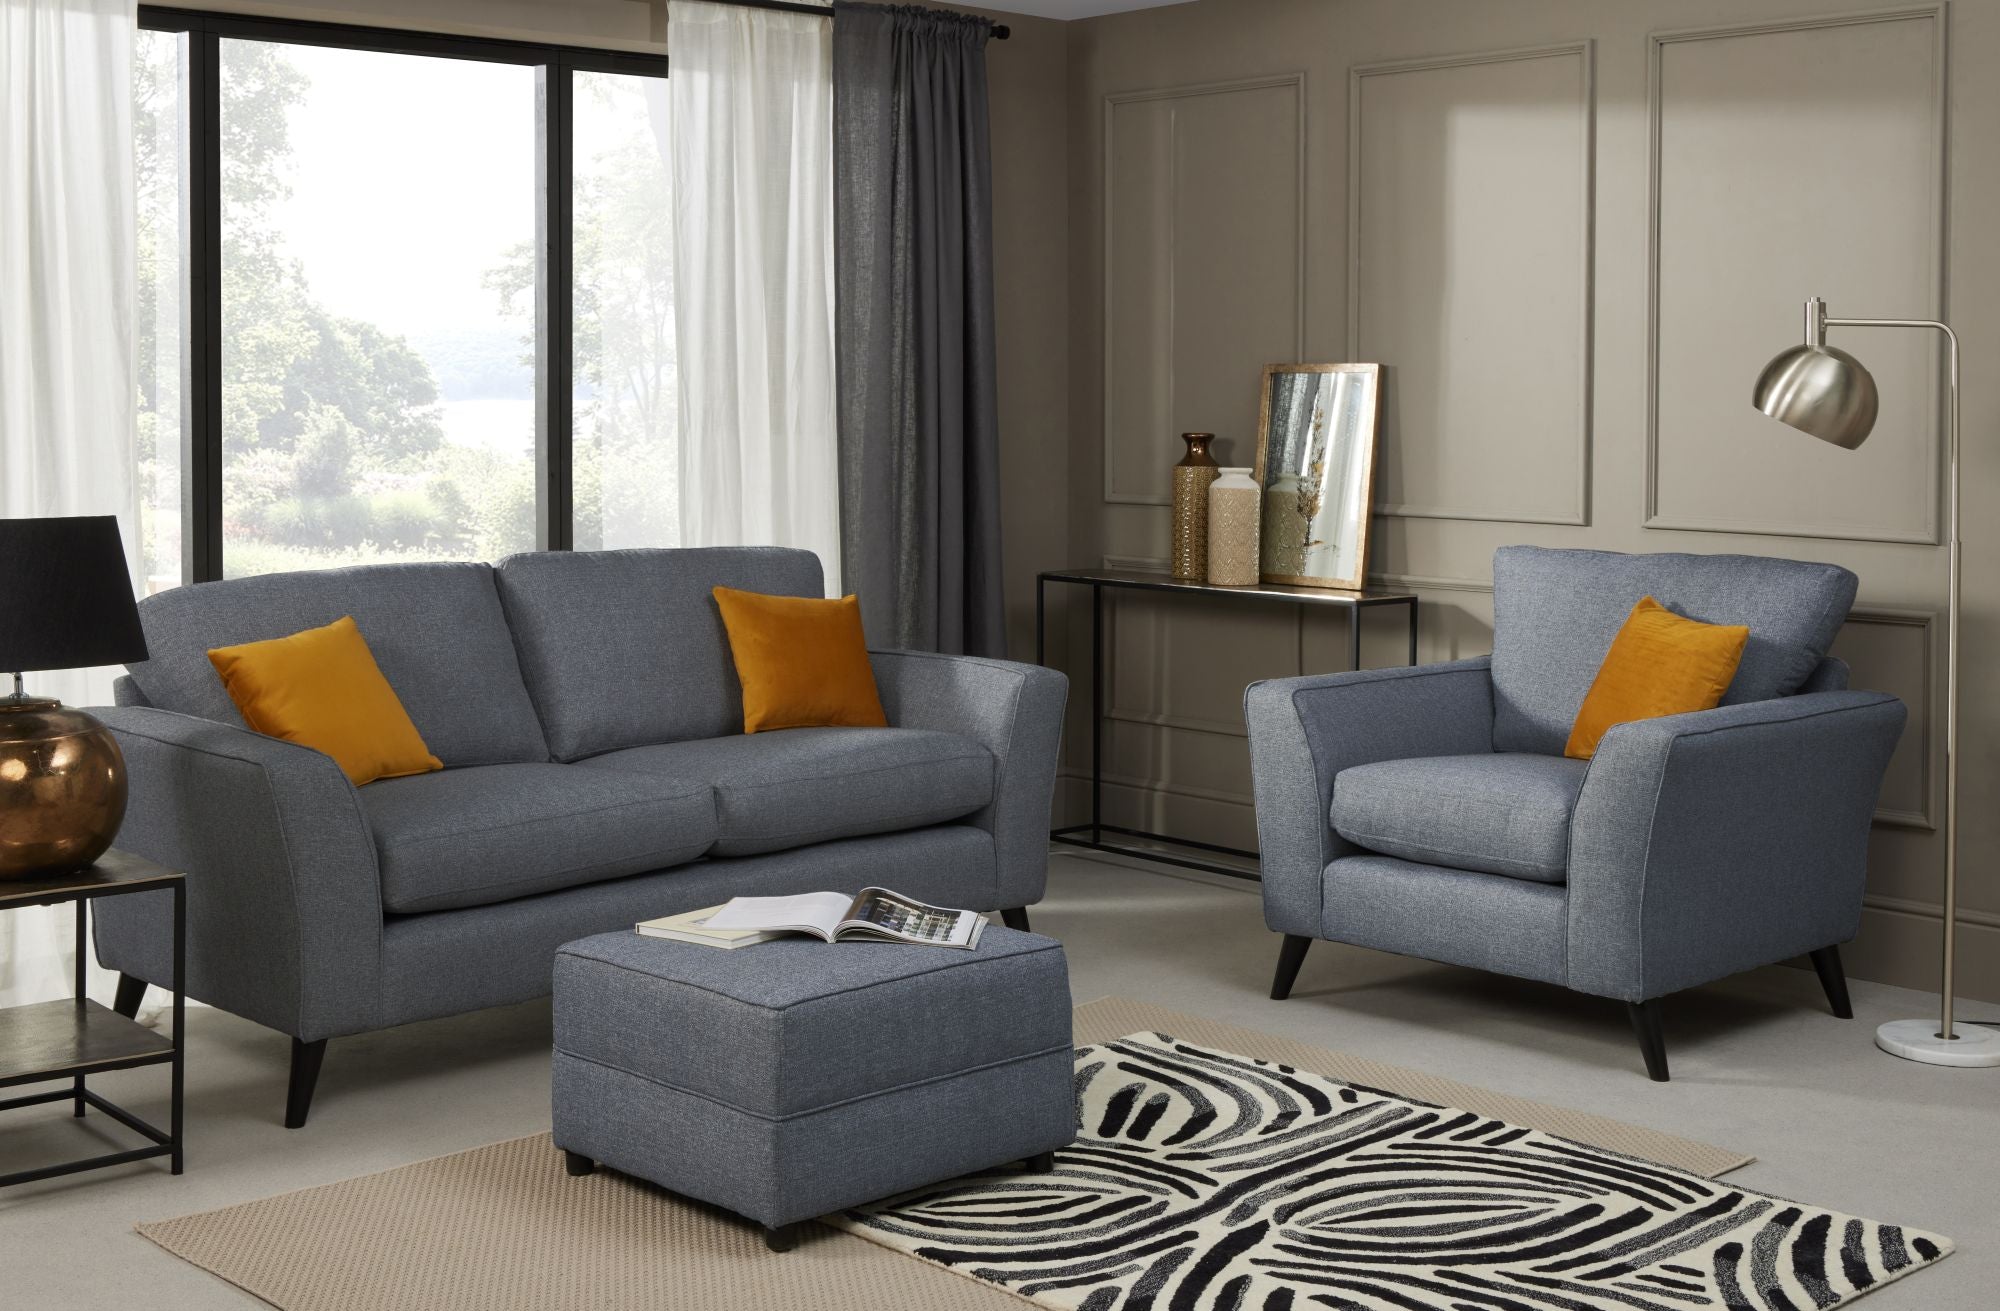 Libby 3 seater, armchair and footstool in denim show in a room setting